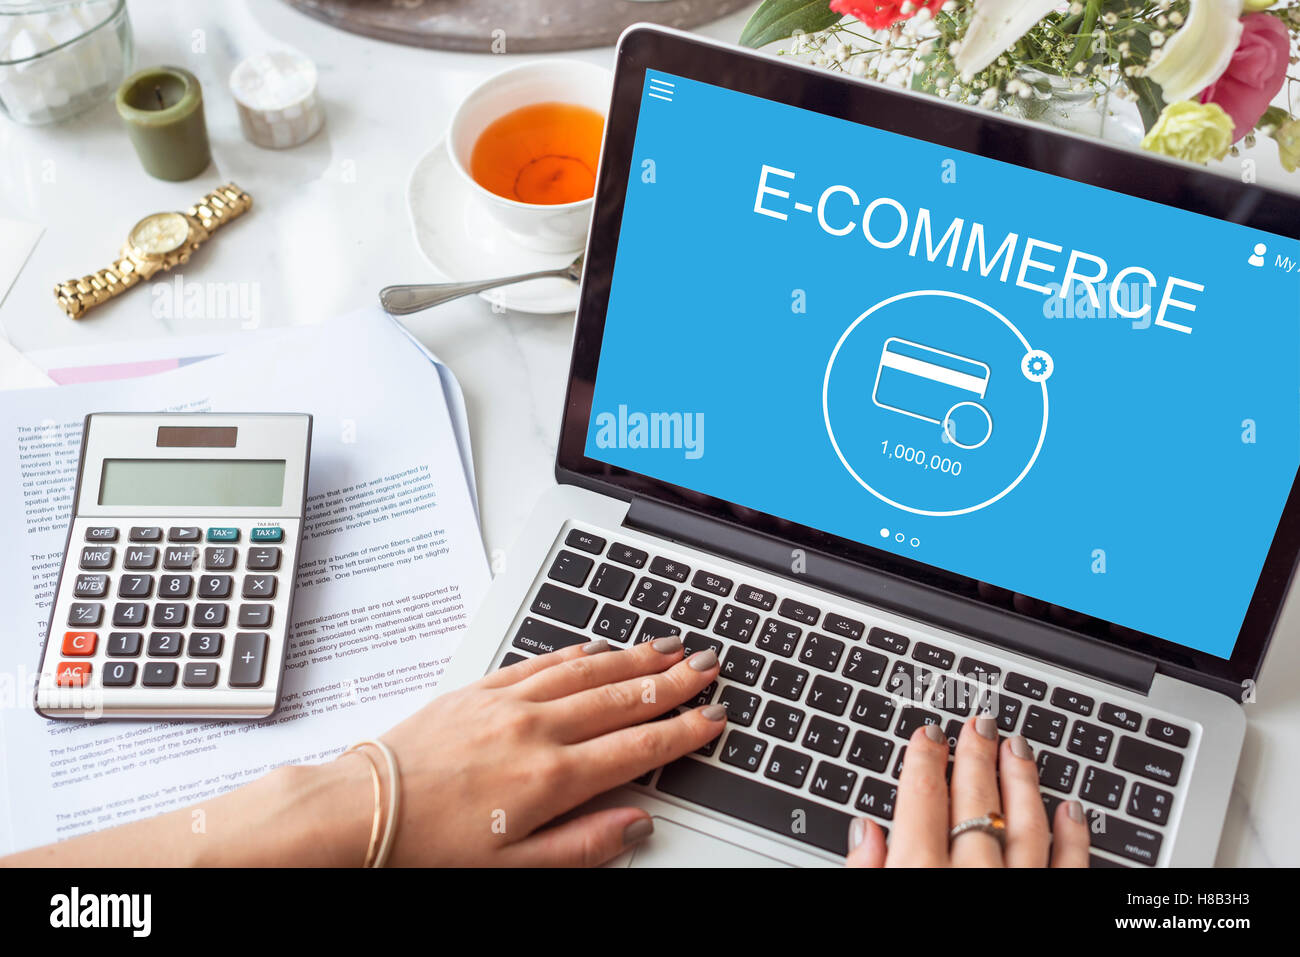 E-Commerce Online Payment Internet Banking Concept Stock Photo